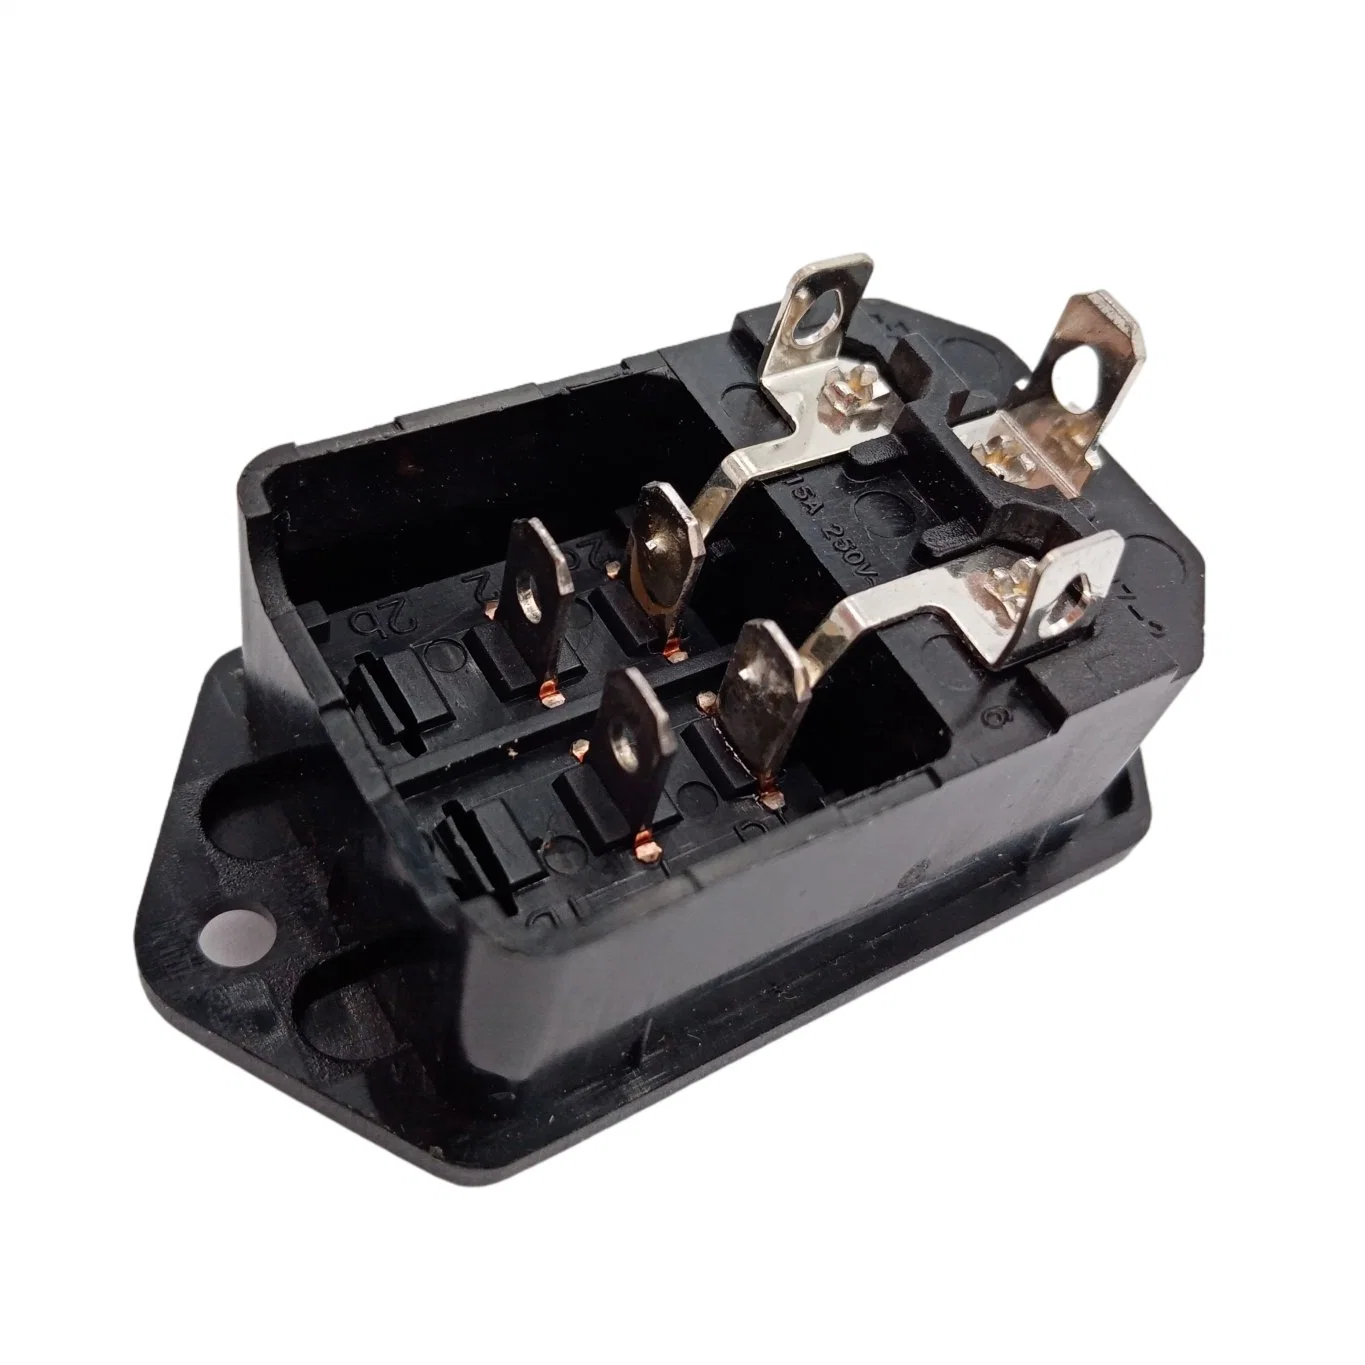 Ene60320 C14 Male Socket with Rocker Switch 3 Pins Screw Mount Medical Electrical Socket 10A 250V PDU Connector